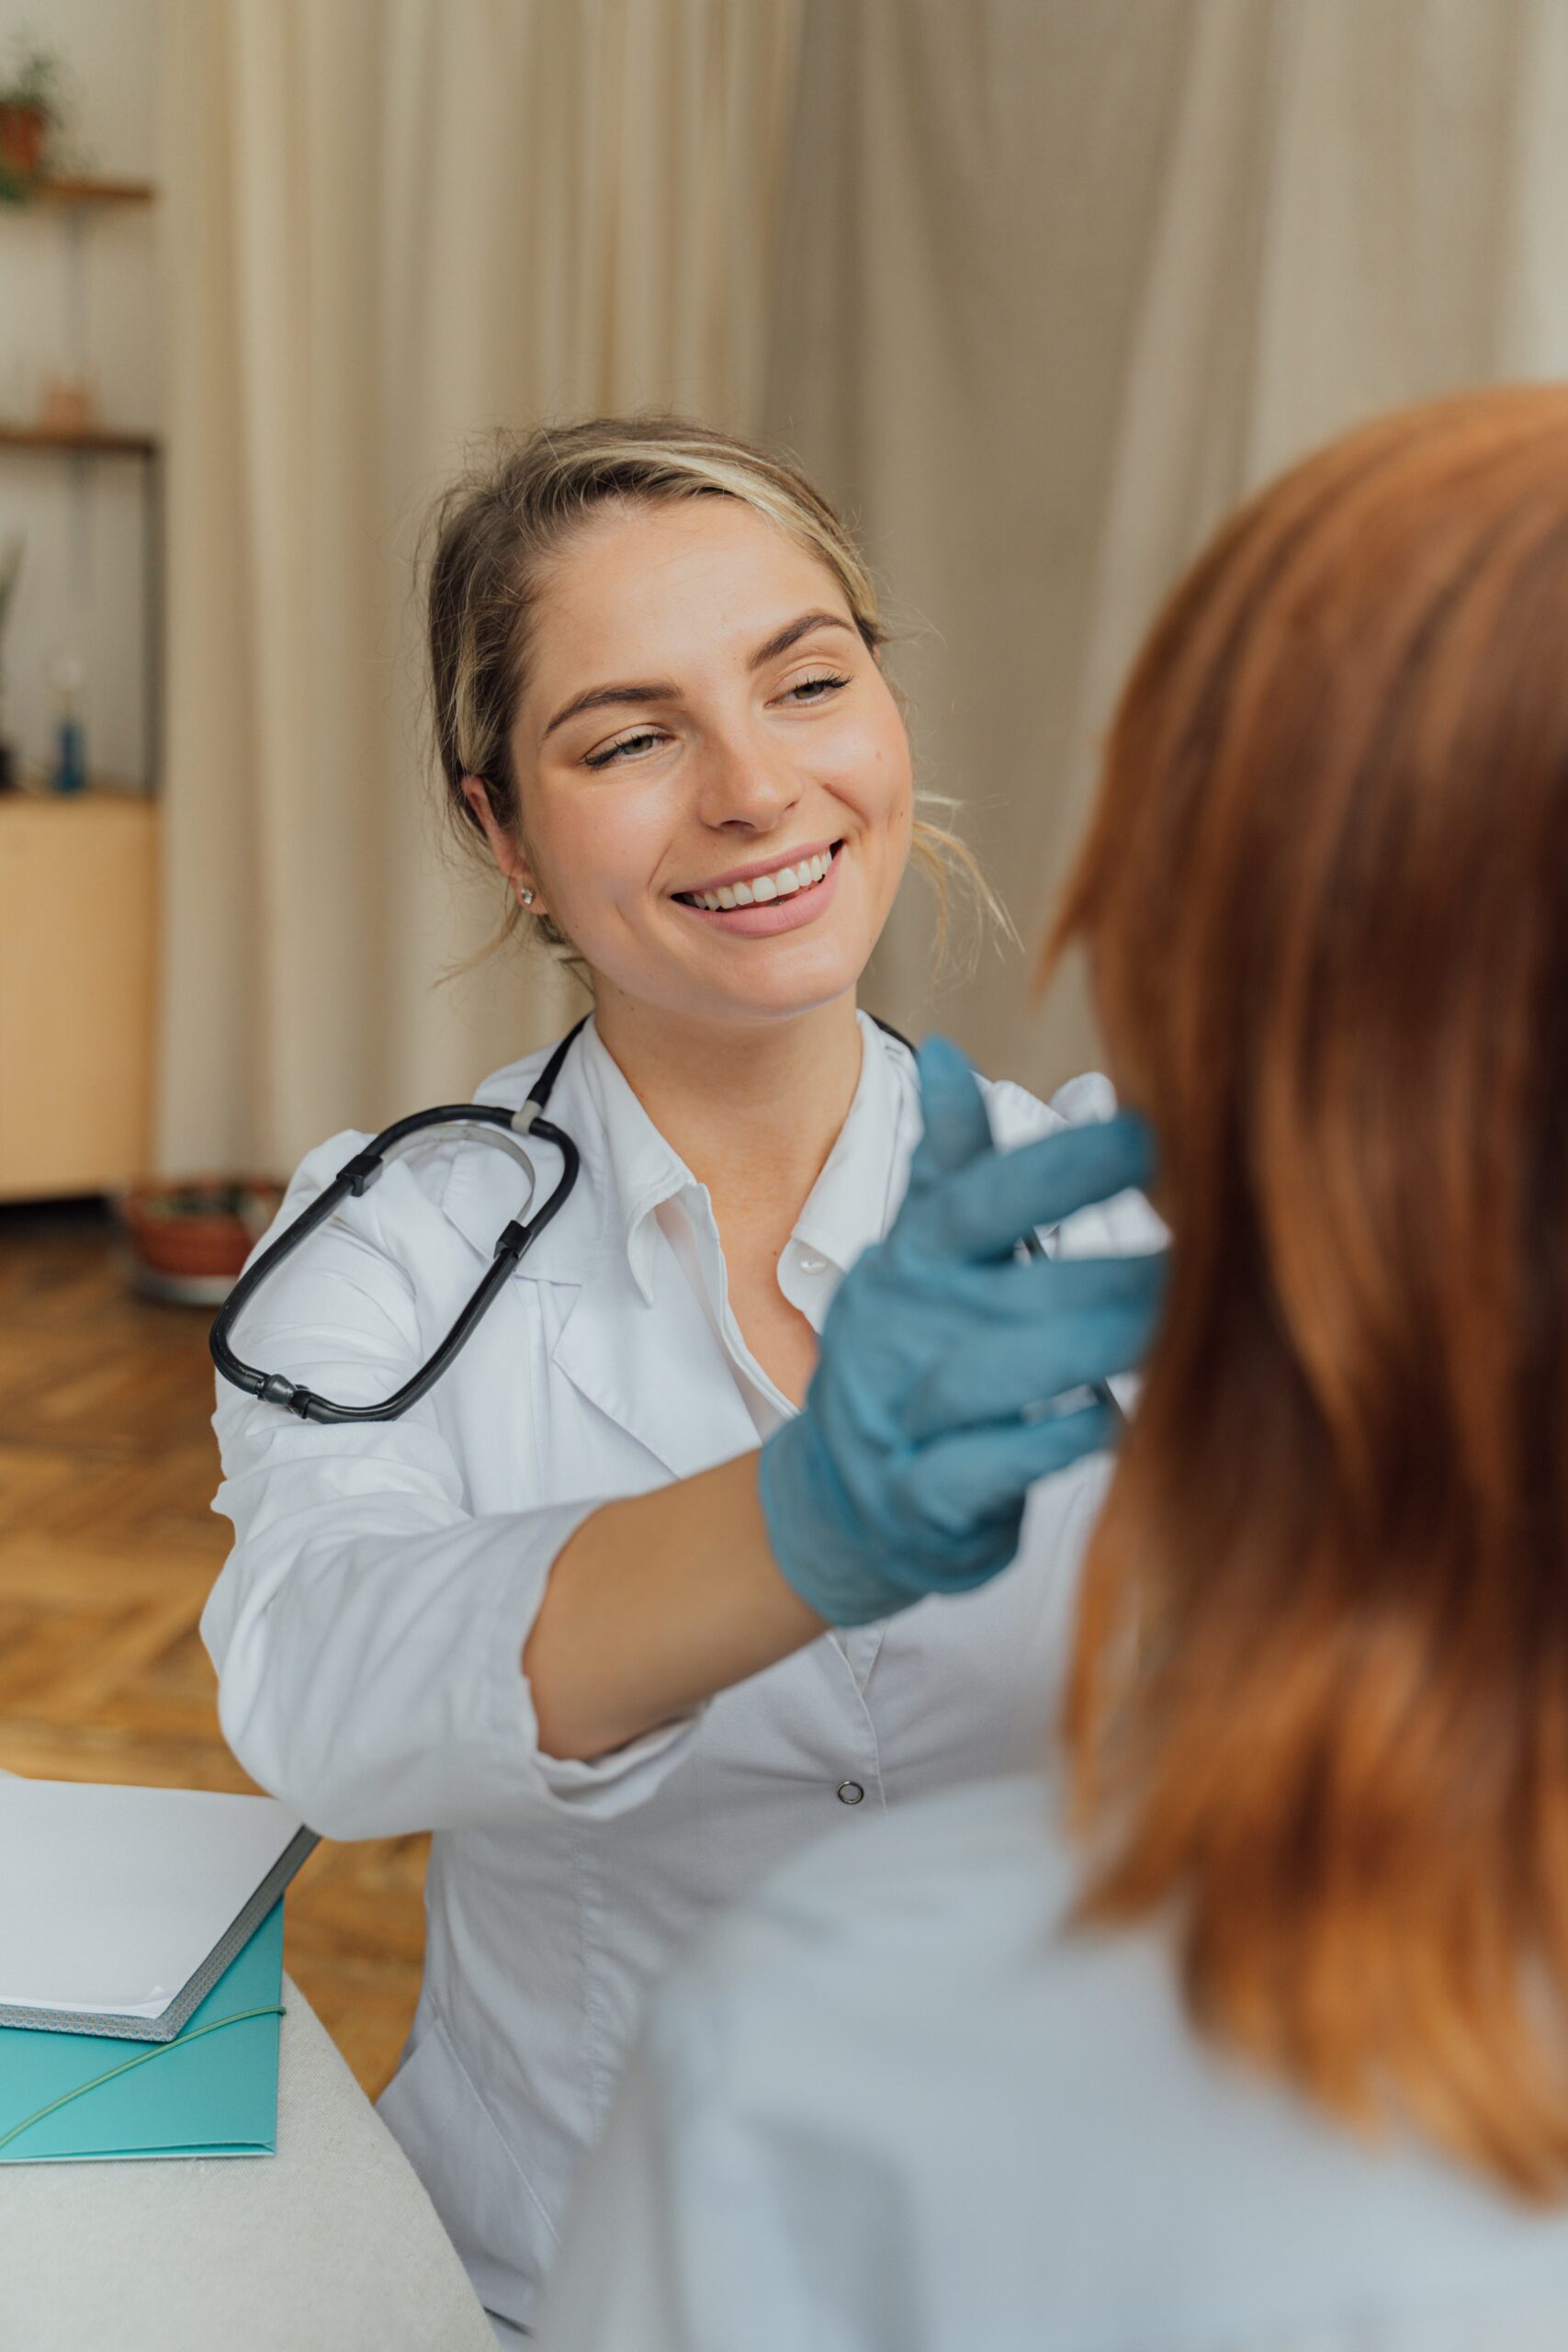 A female doctor examining a patient